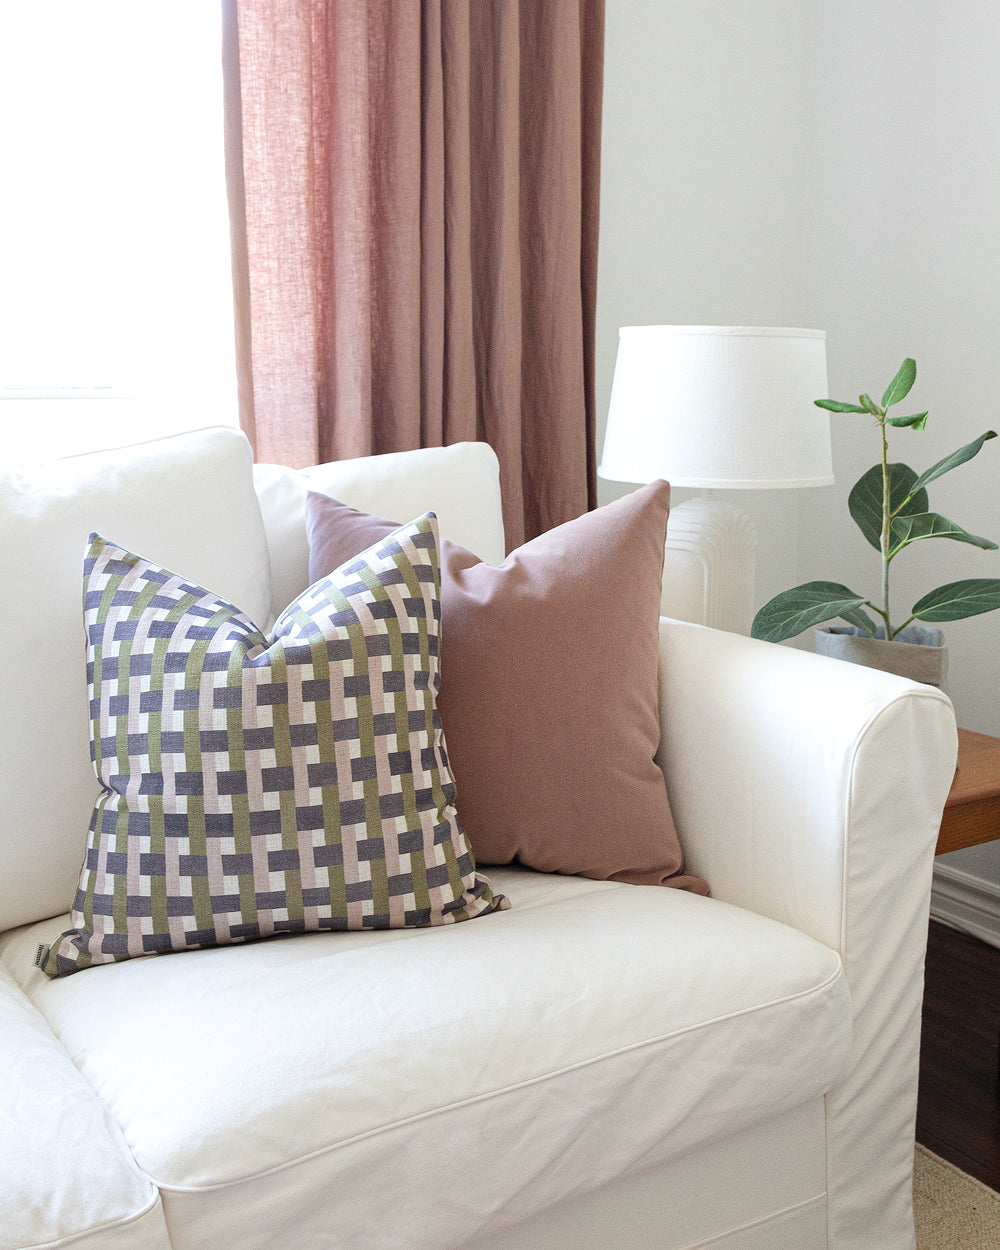 Plum, mauve and olive green check printed pillow sitting on white sofa with pink mohair pillow